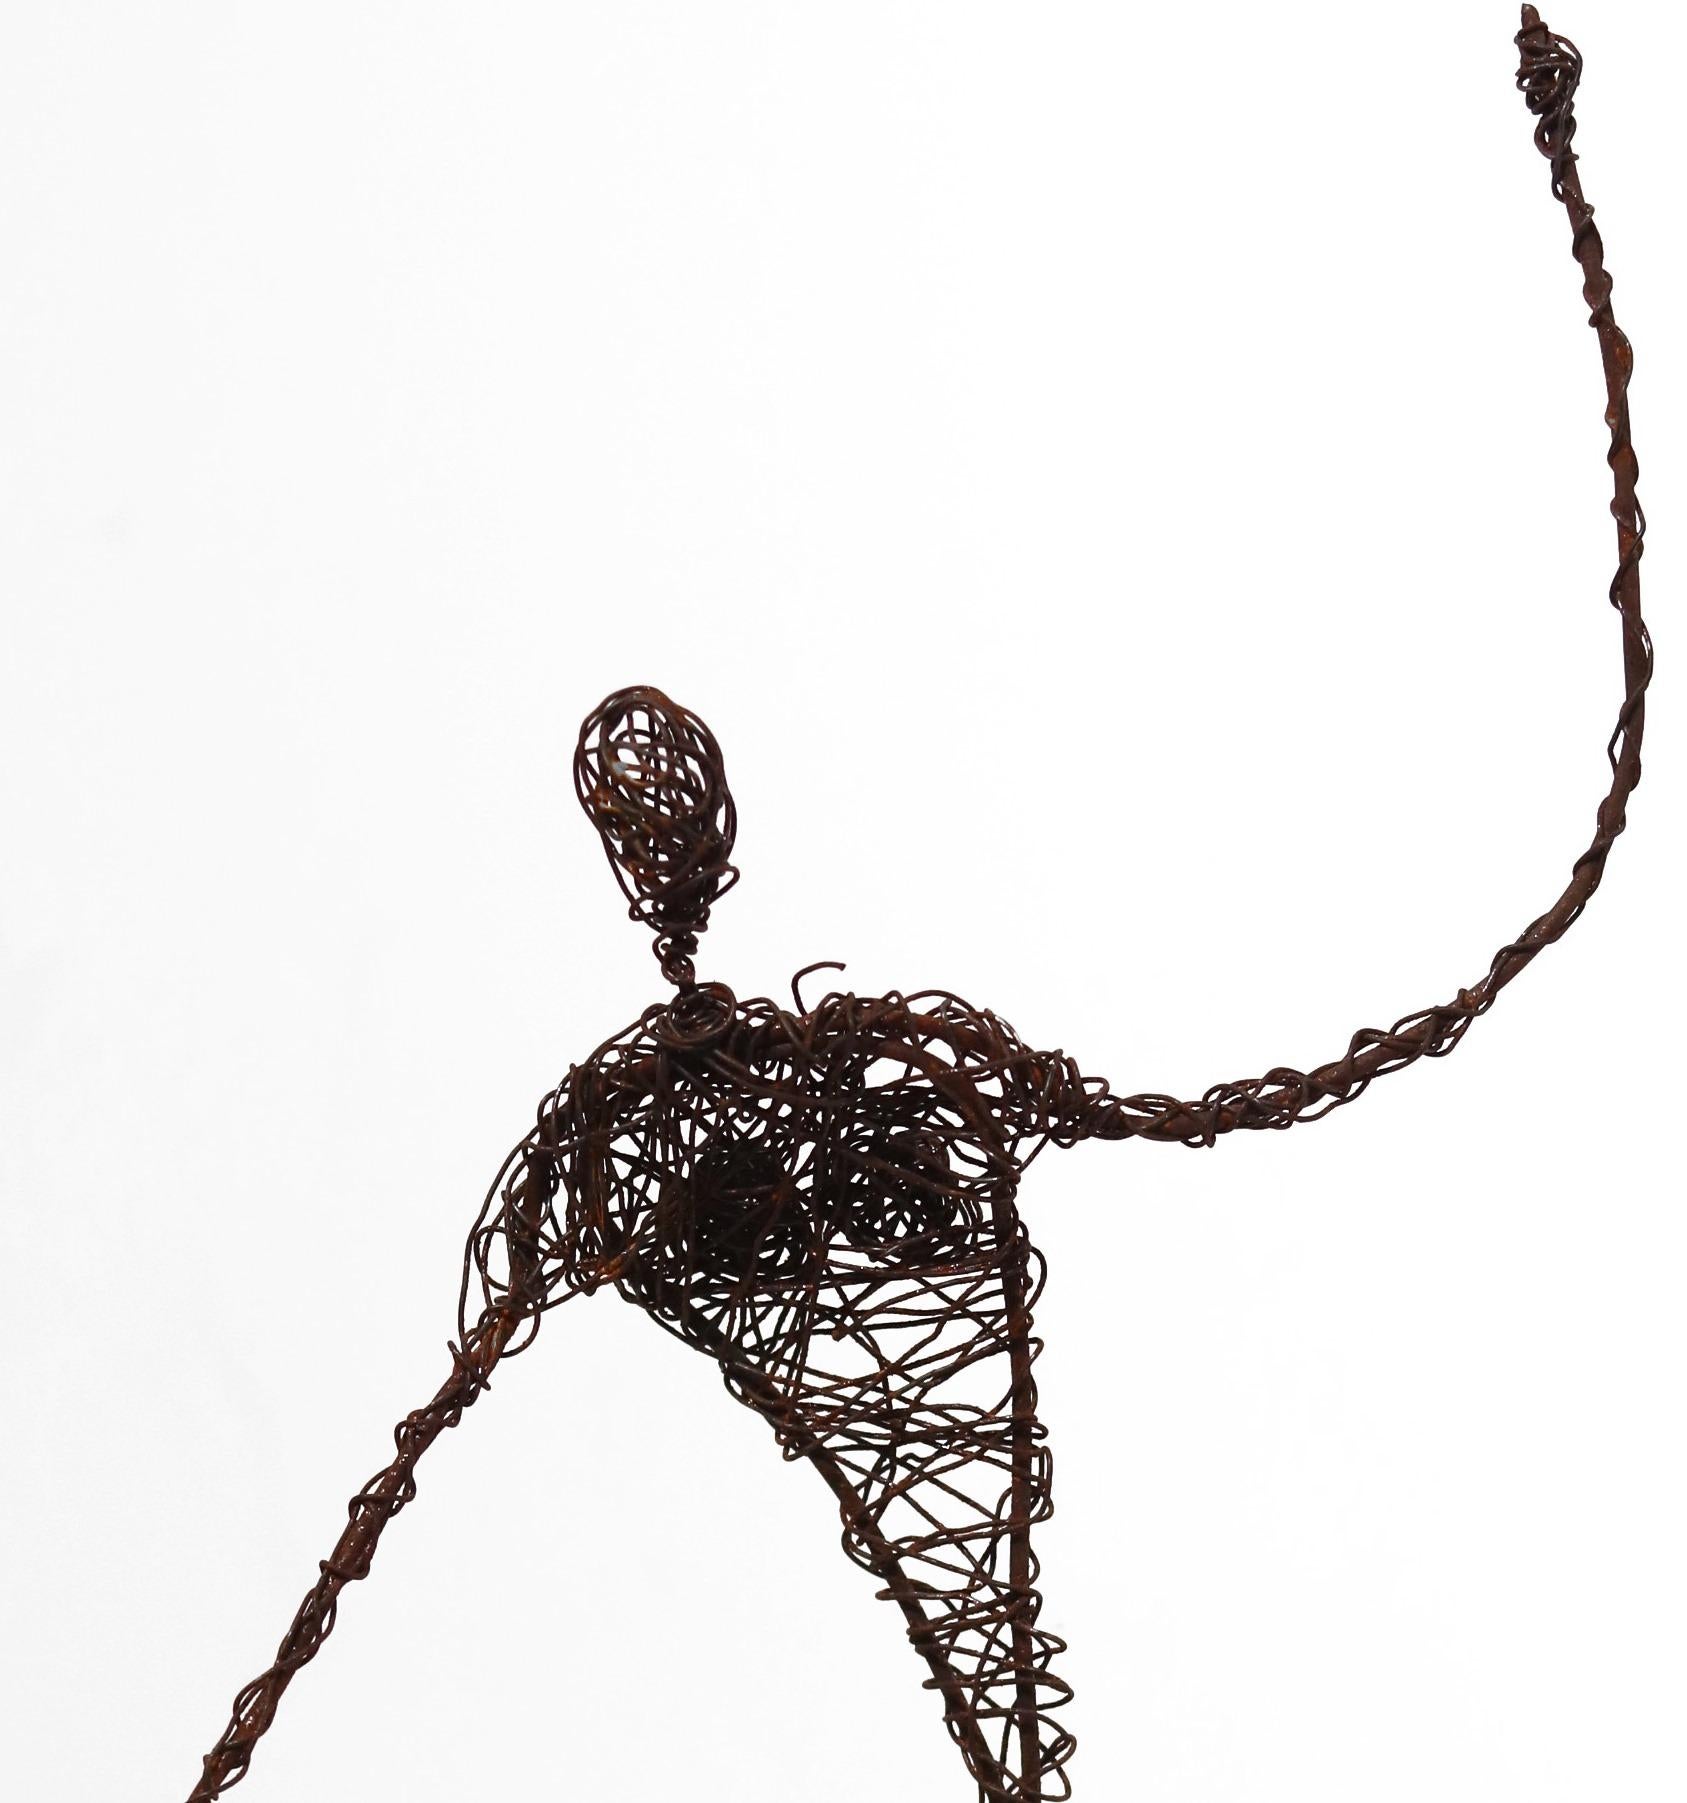 Figure 6 - Iron Wire Sculptural Figurative Mixed Media Artwork - Brown Abstract Sculpture by Susy Hunziker